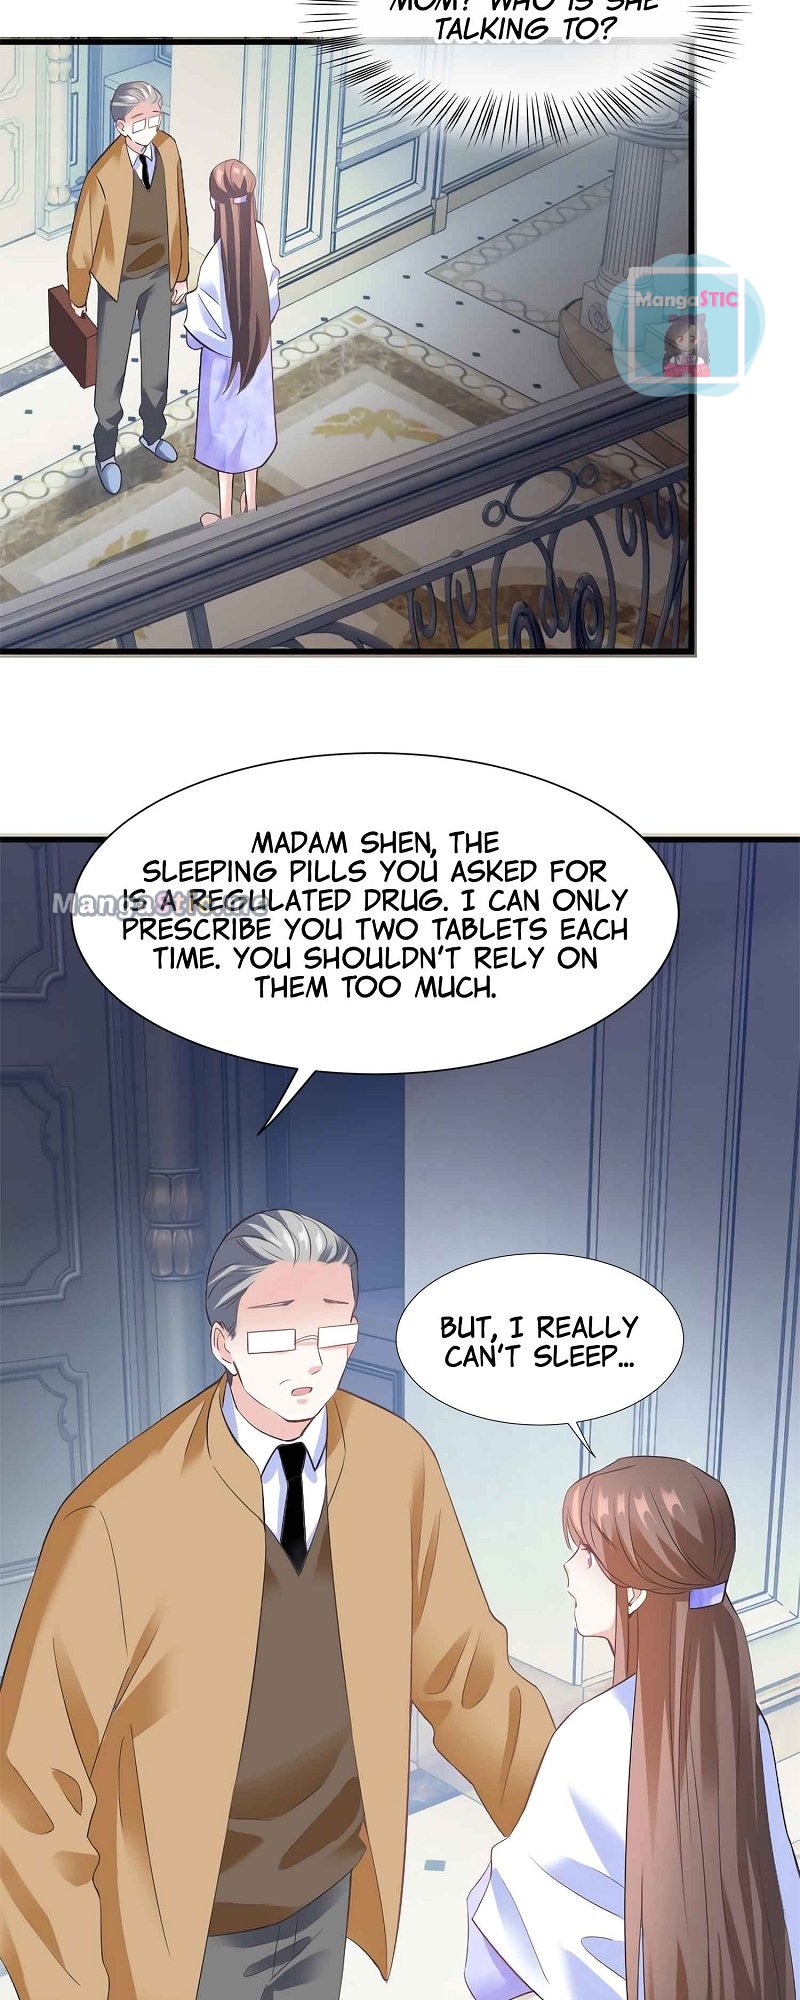 Nancheng Waits For The Moon - Page 3